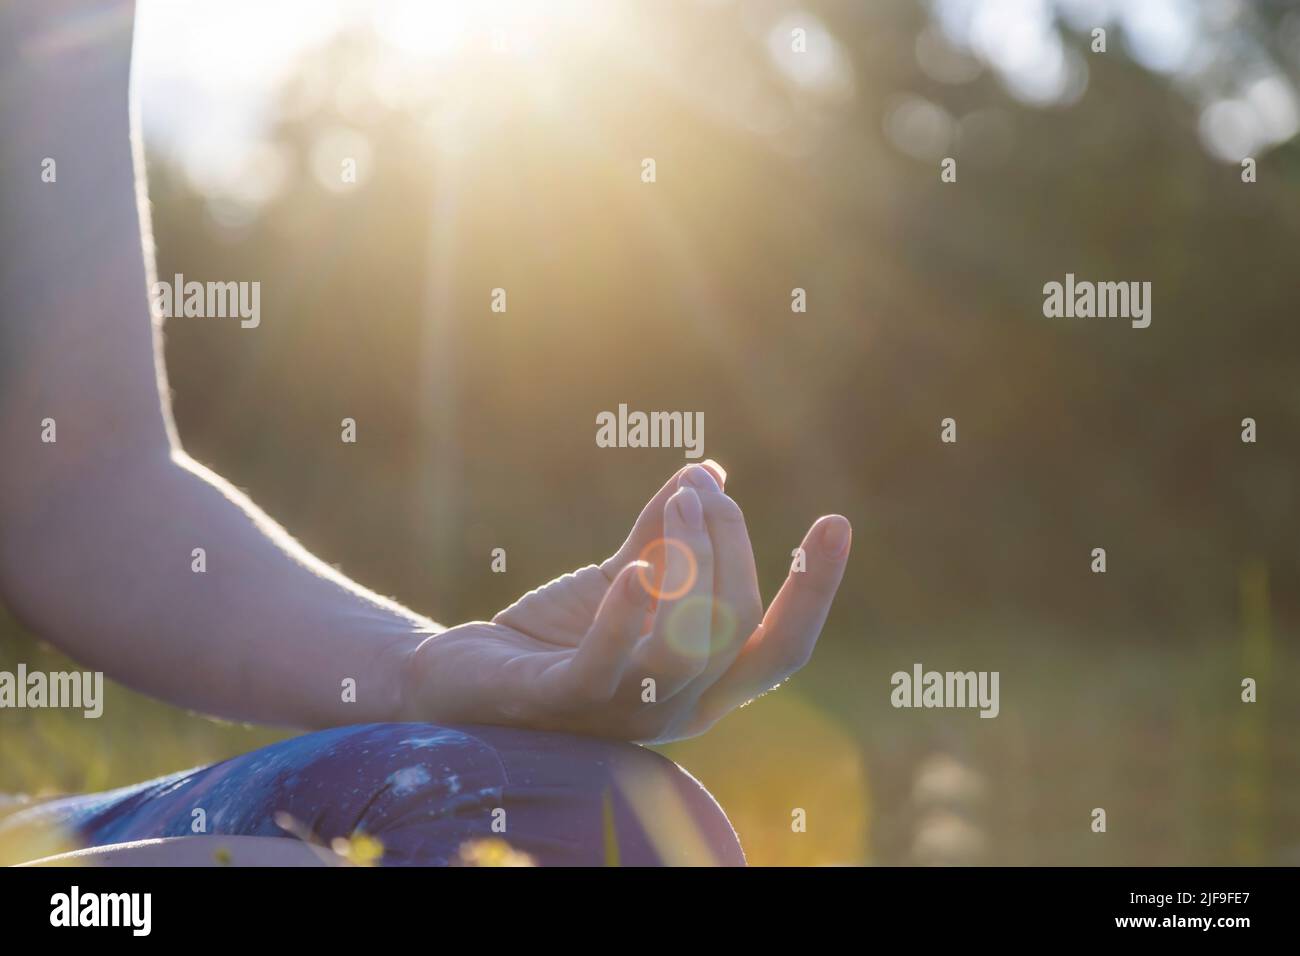 Woman in sportswear doing yoga, half lotus pose with mudra gesture, close-up. Wellness concept Stock Photo